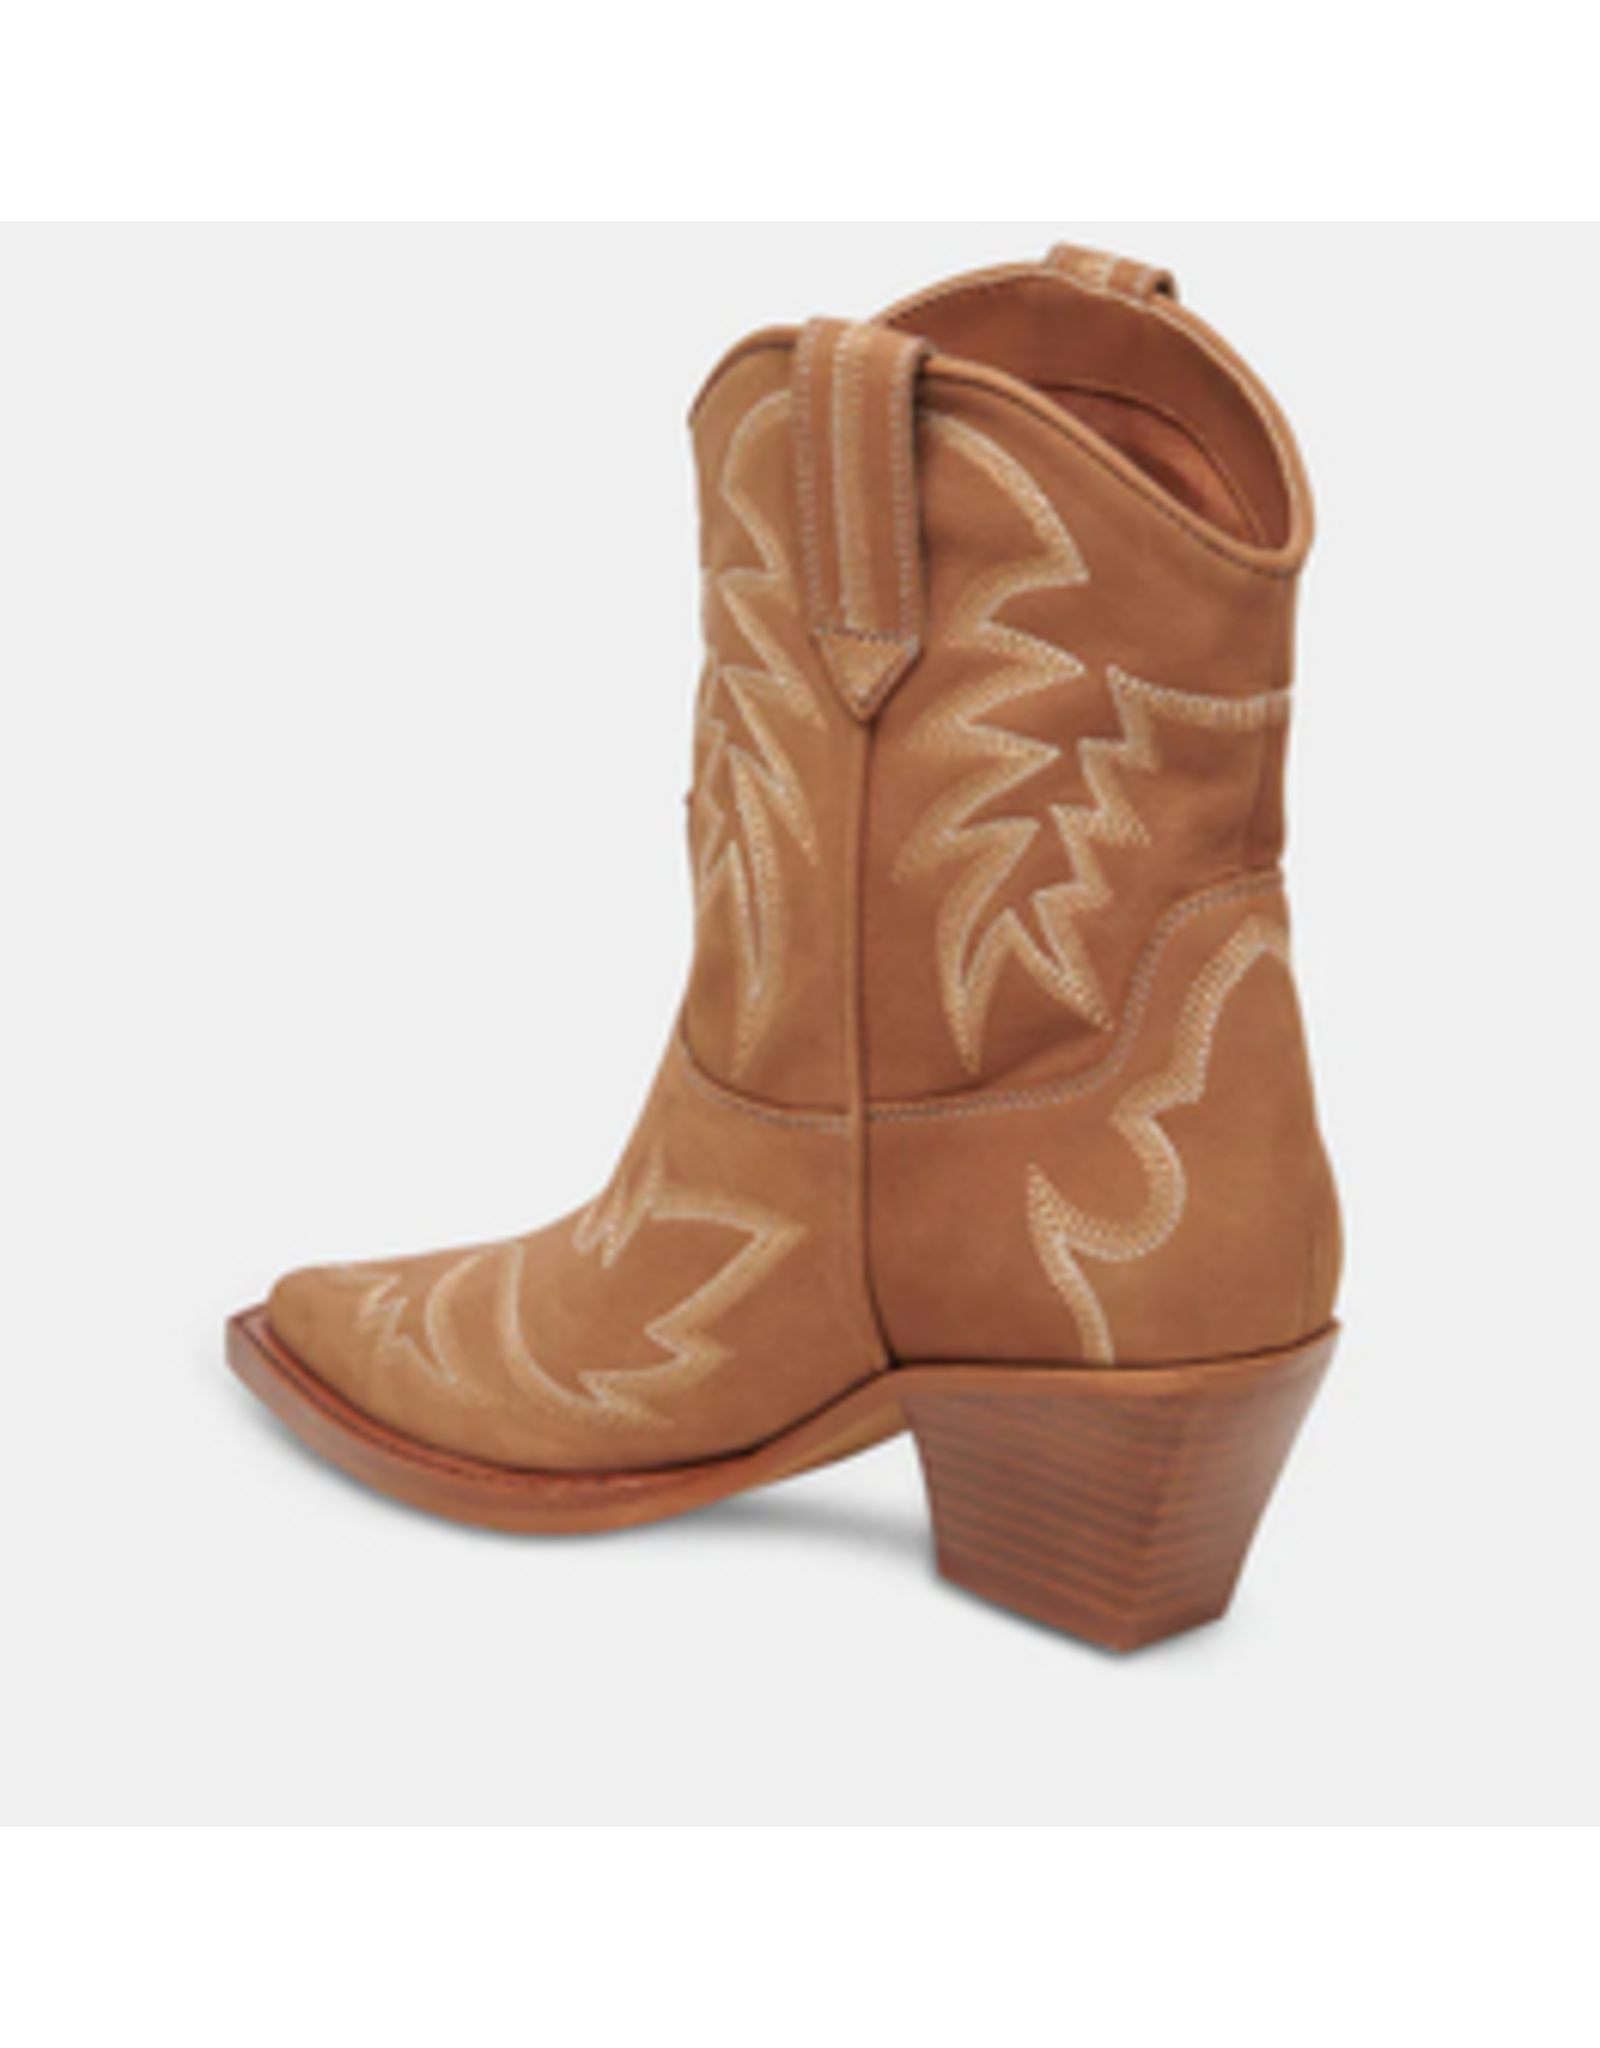 Dolce Vita Runa Boots in Whiskey Leather